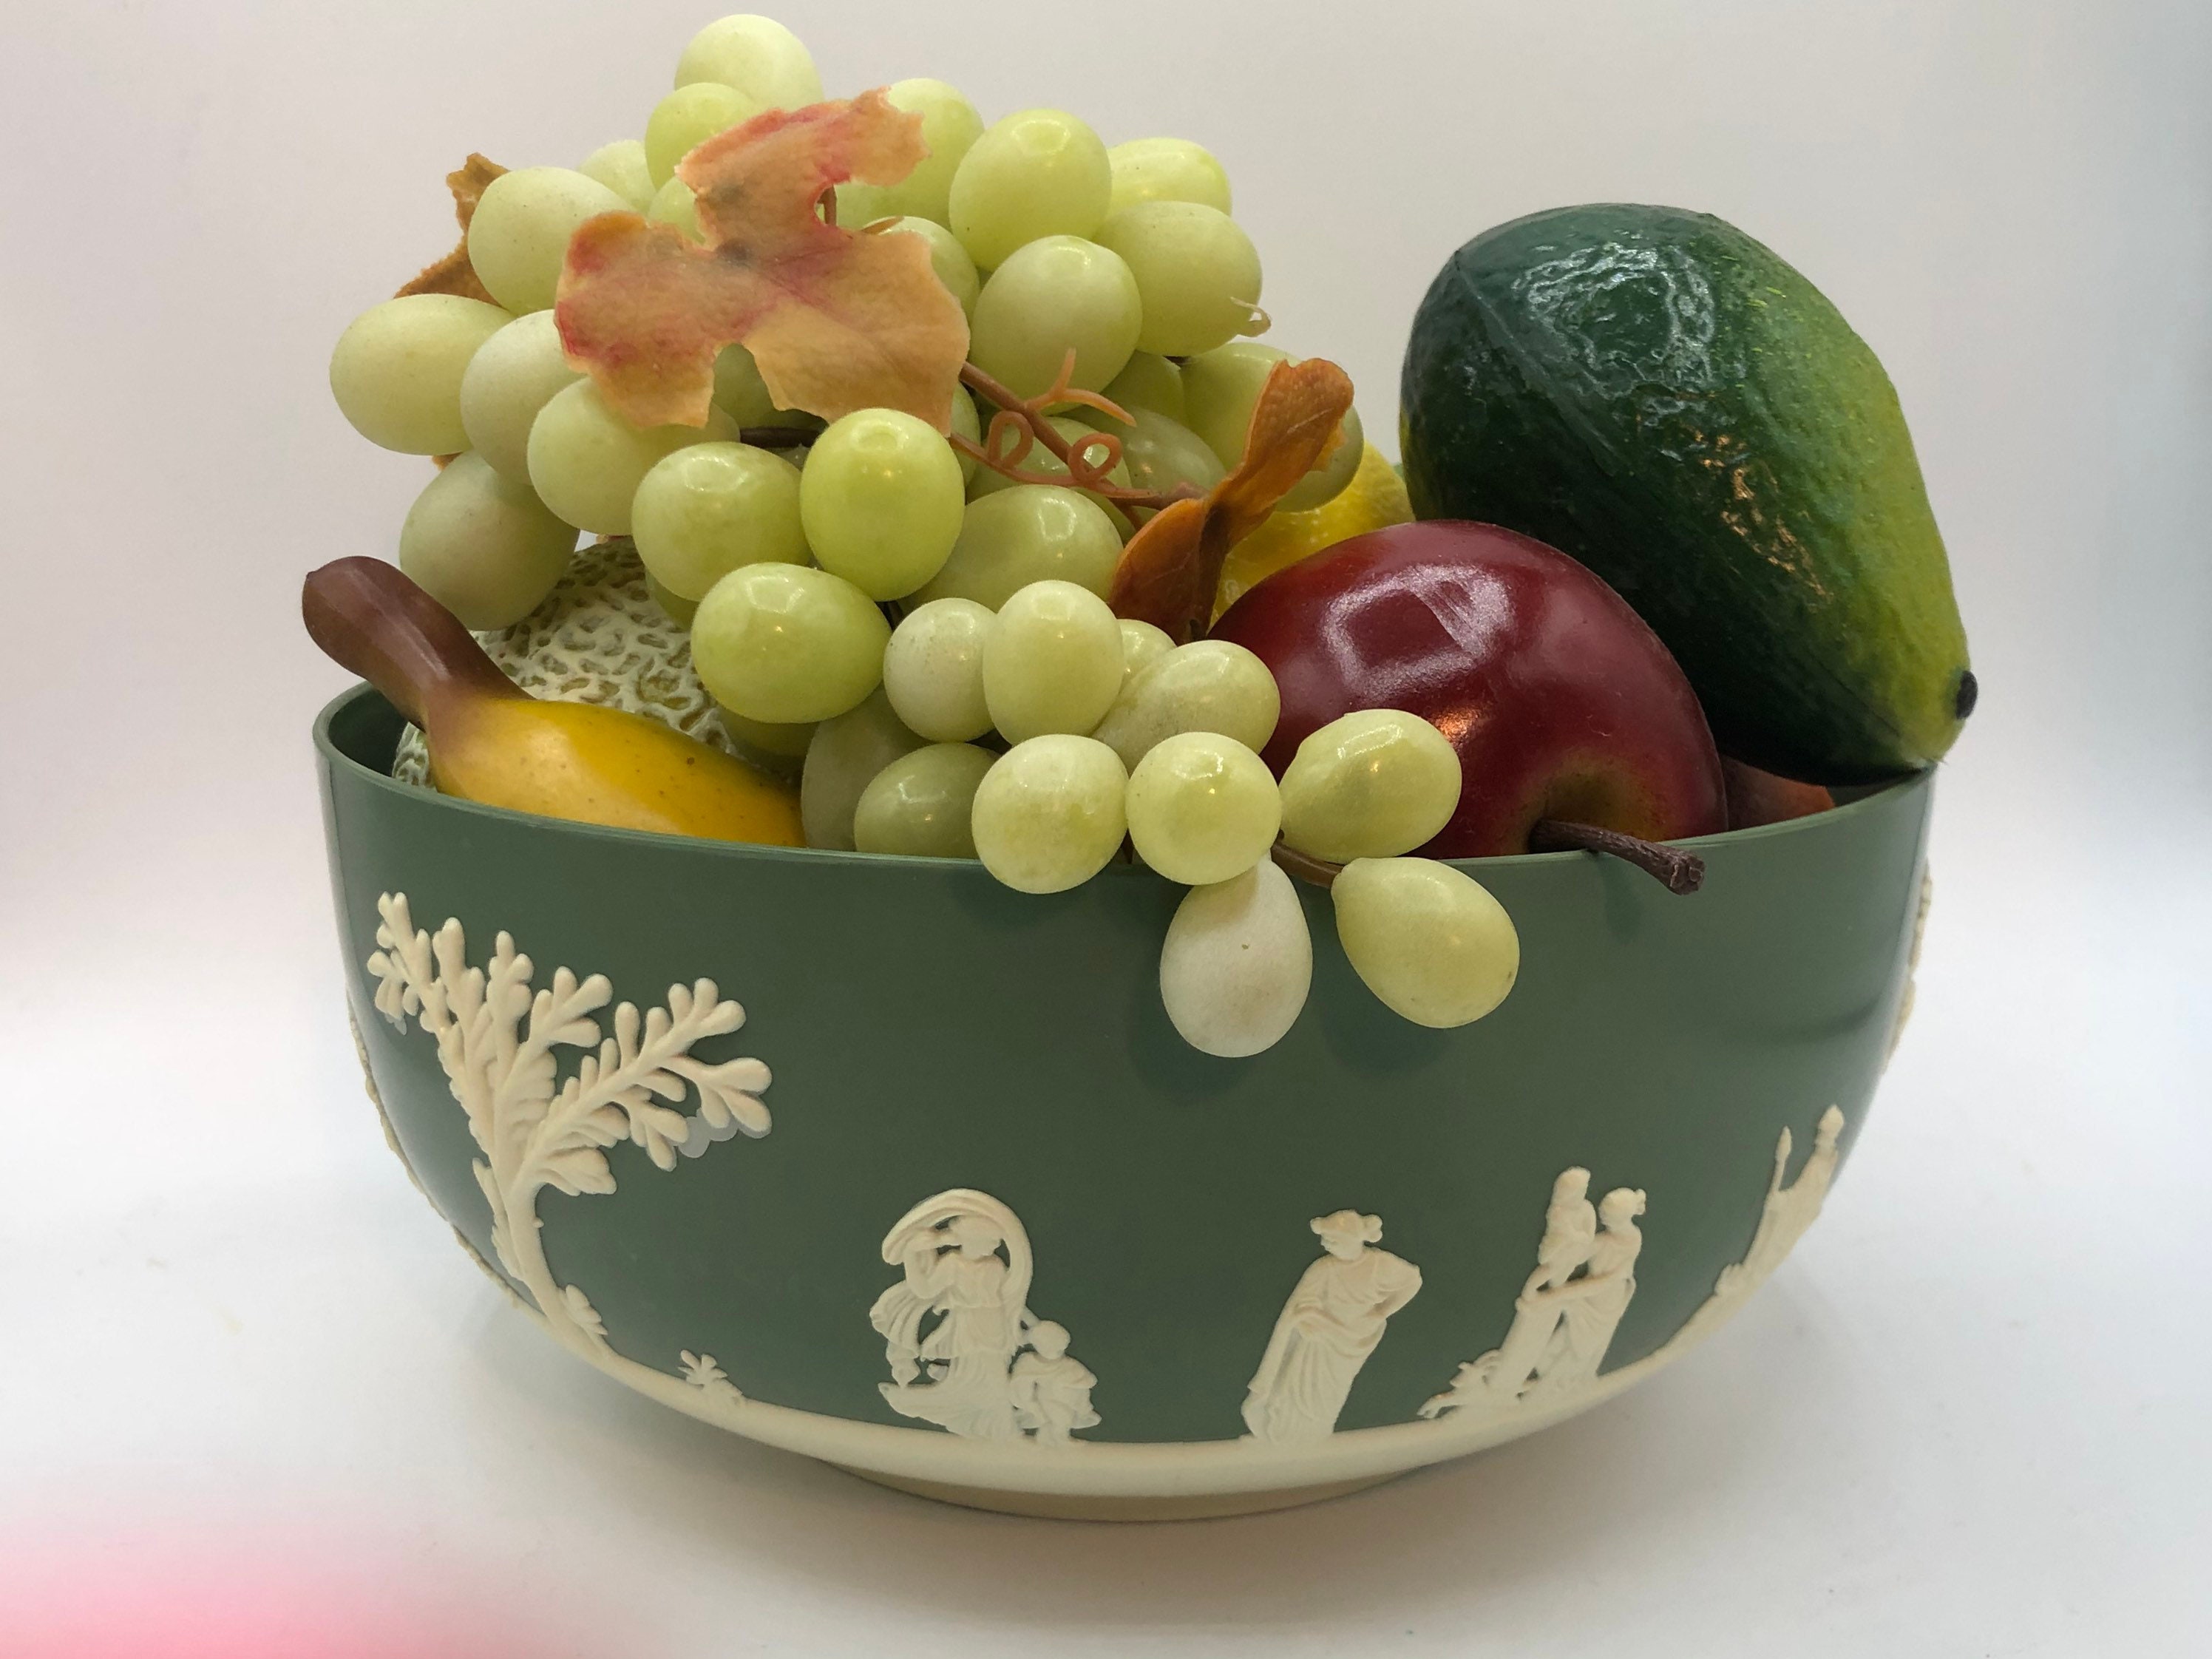 Vintage Large Dialene Better-maid Plastic Berry Plastic Fruit Bowl Avocado  Green 1960's Wedgewood Style Melmac Dish Made in England 